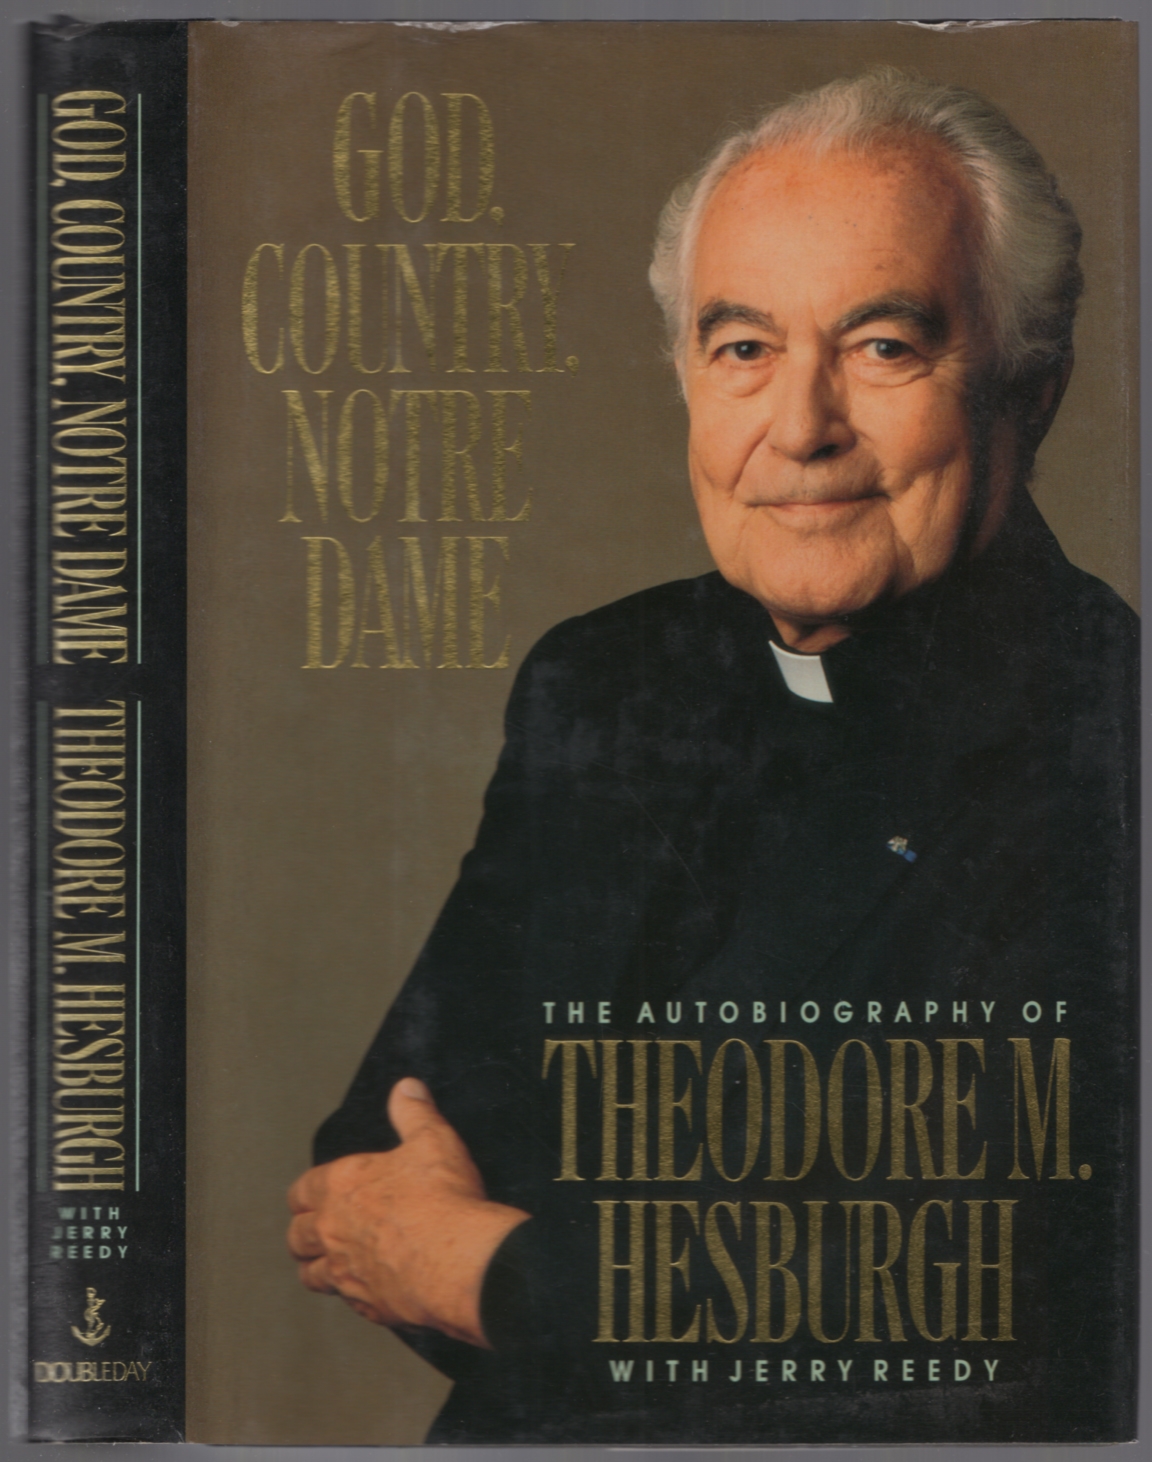 God, Country, Notre Dame - HESBURGH, theodore M.